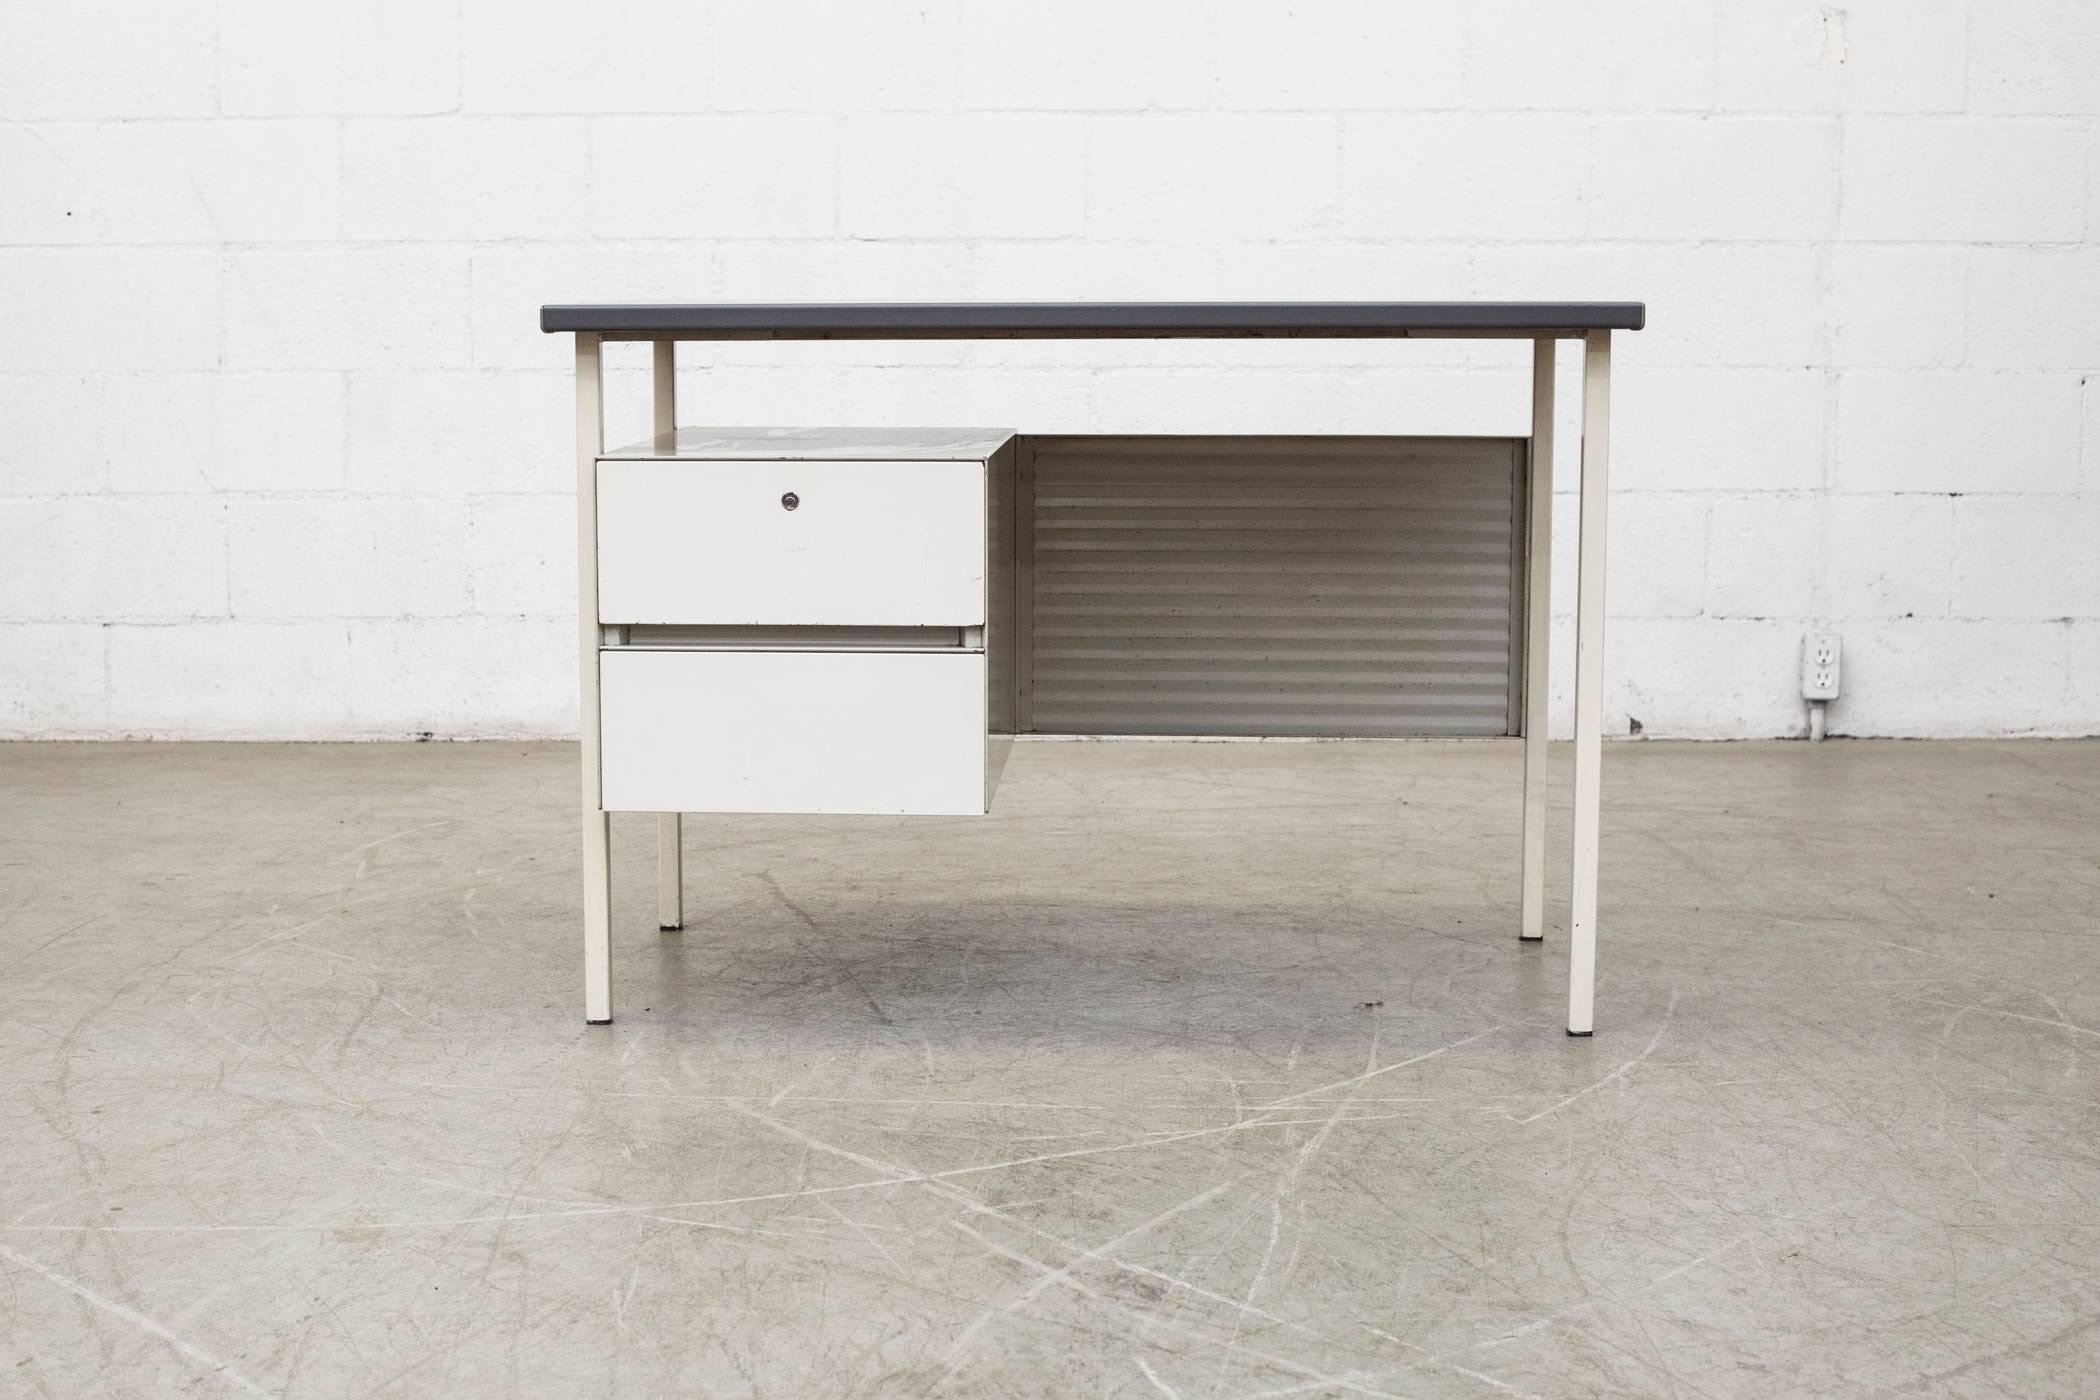 Gispen model 3803 by A.R. Cordemeijer. Cute little light grey enameled metal desk with matching enameled grey corrugated privacy screen and charcoal linoleum top. Original condition with some wear to metal frame consistent with age and use.